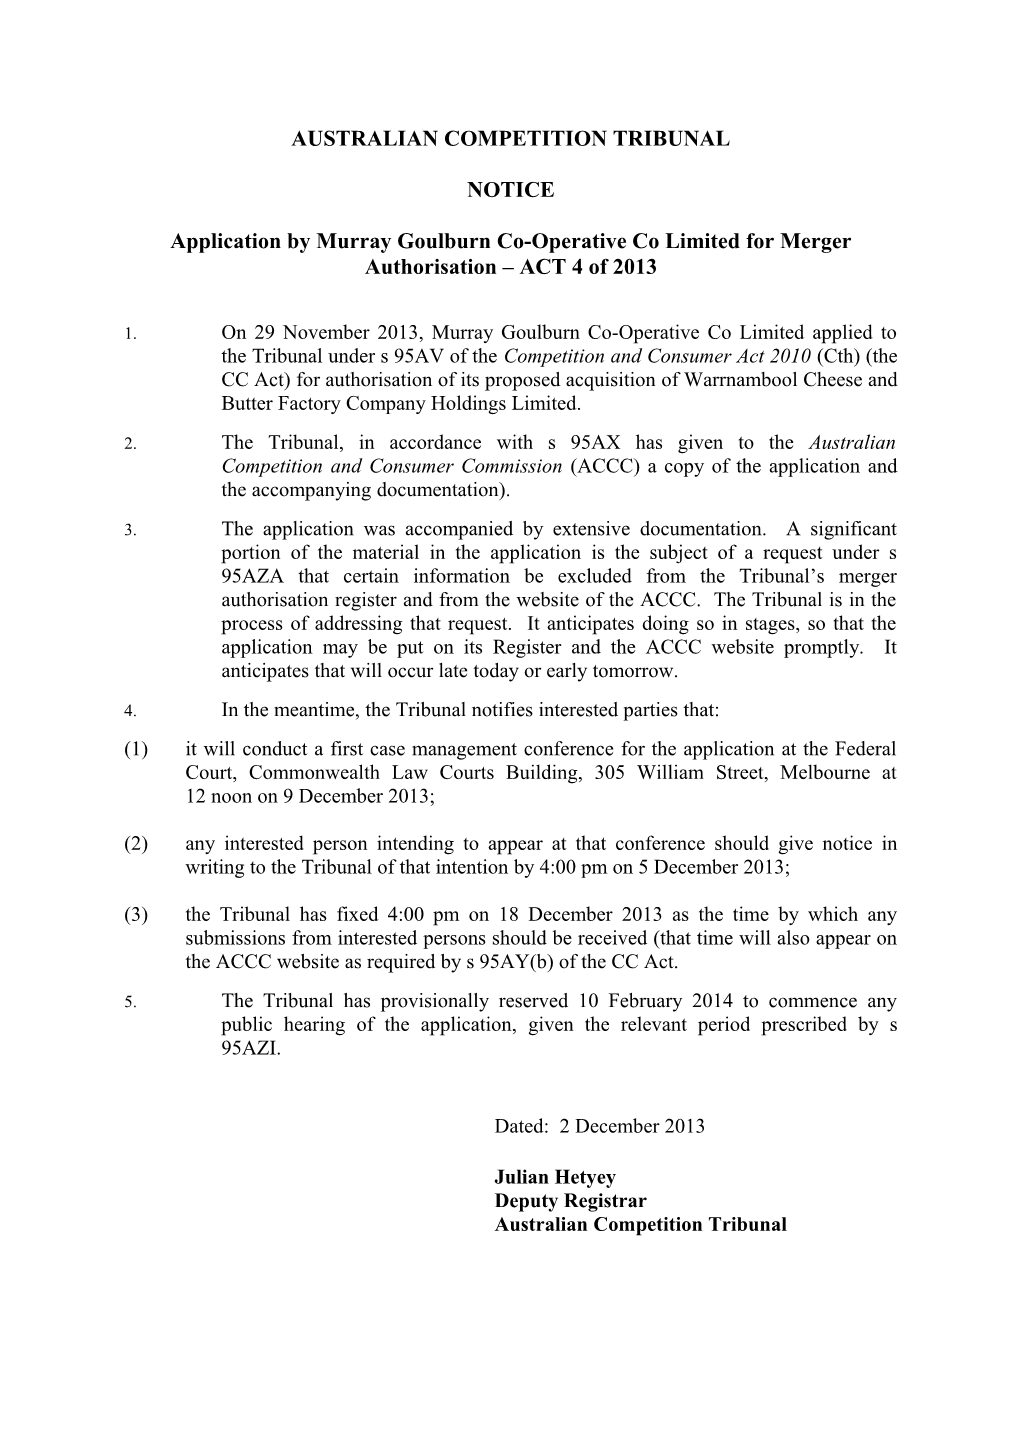 Notice ACT 4 of 2013: Application by Murray Goulburn Co-Operative Co Limited for Merger